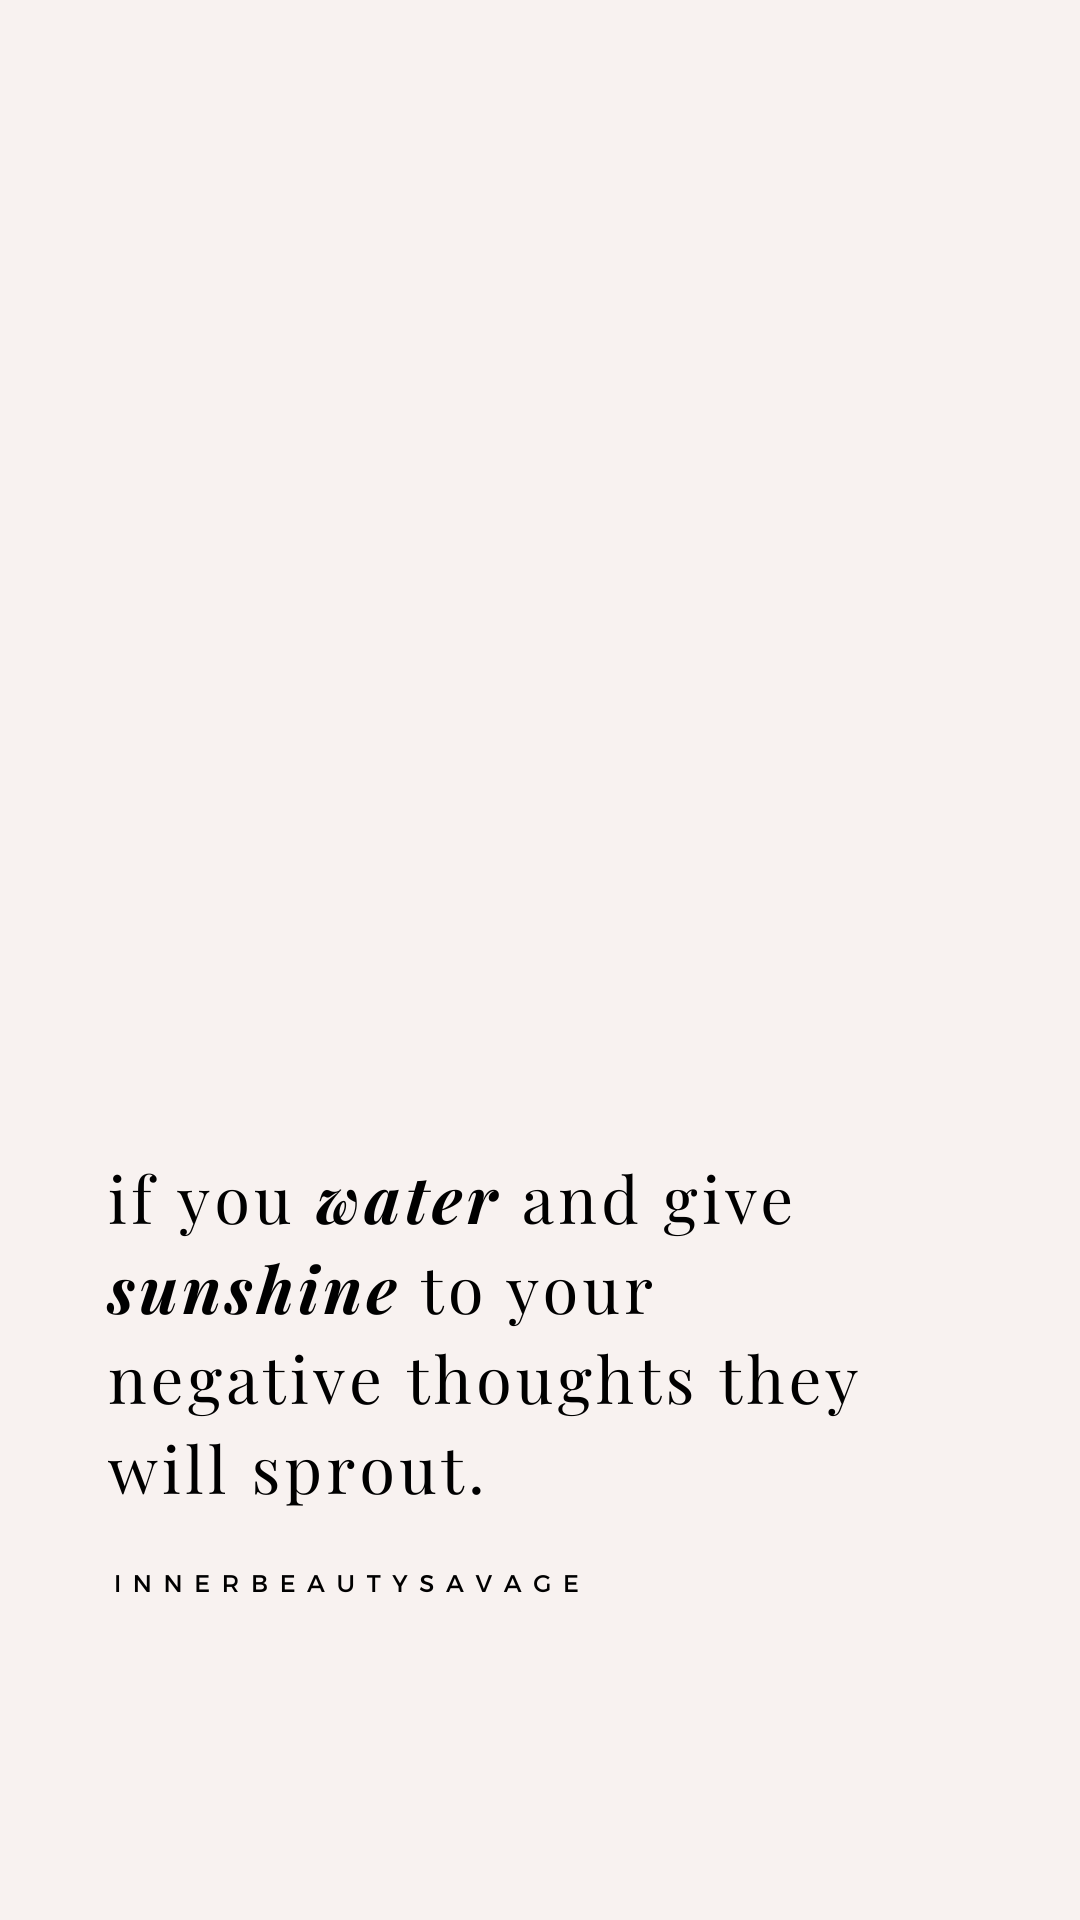 why you have negative thoughts quote
